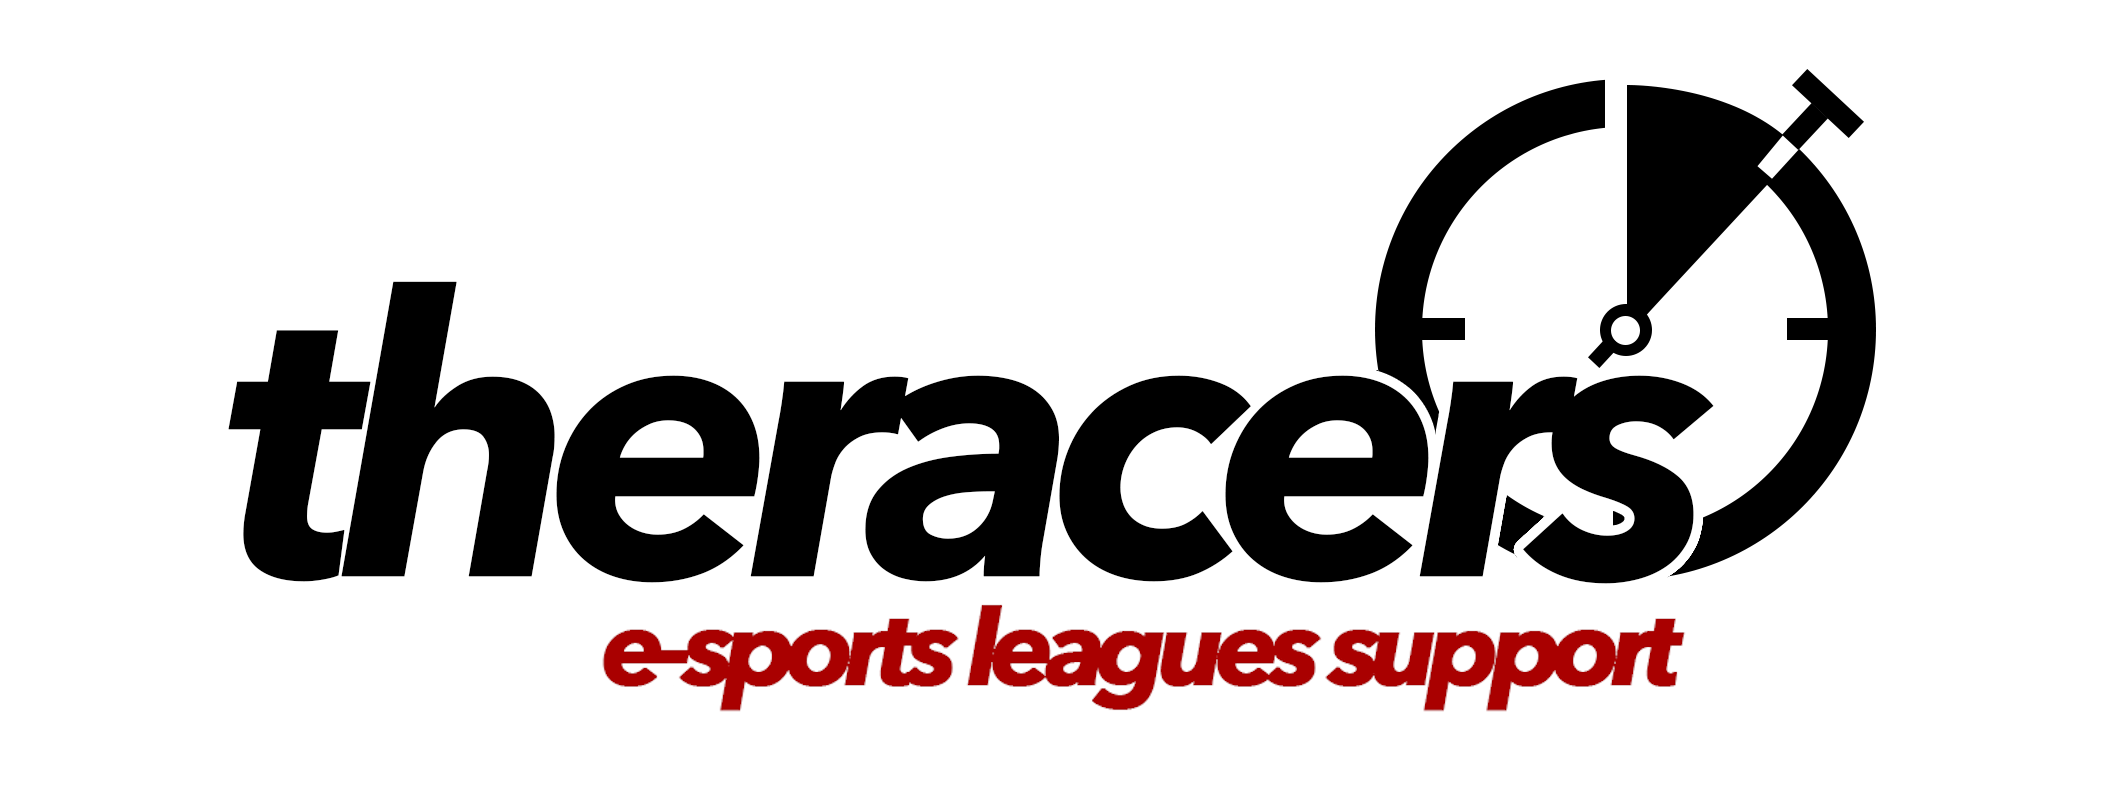 theracerse-sports.png